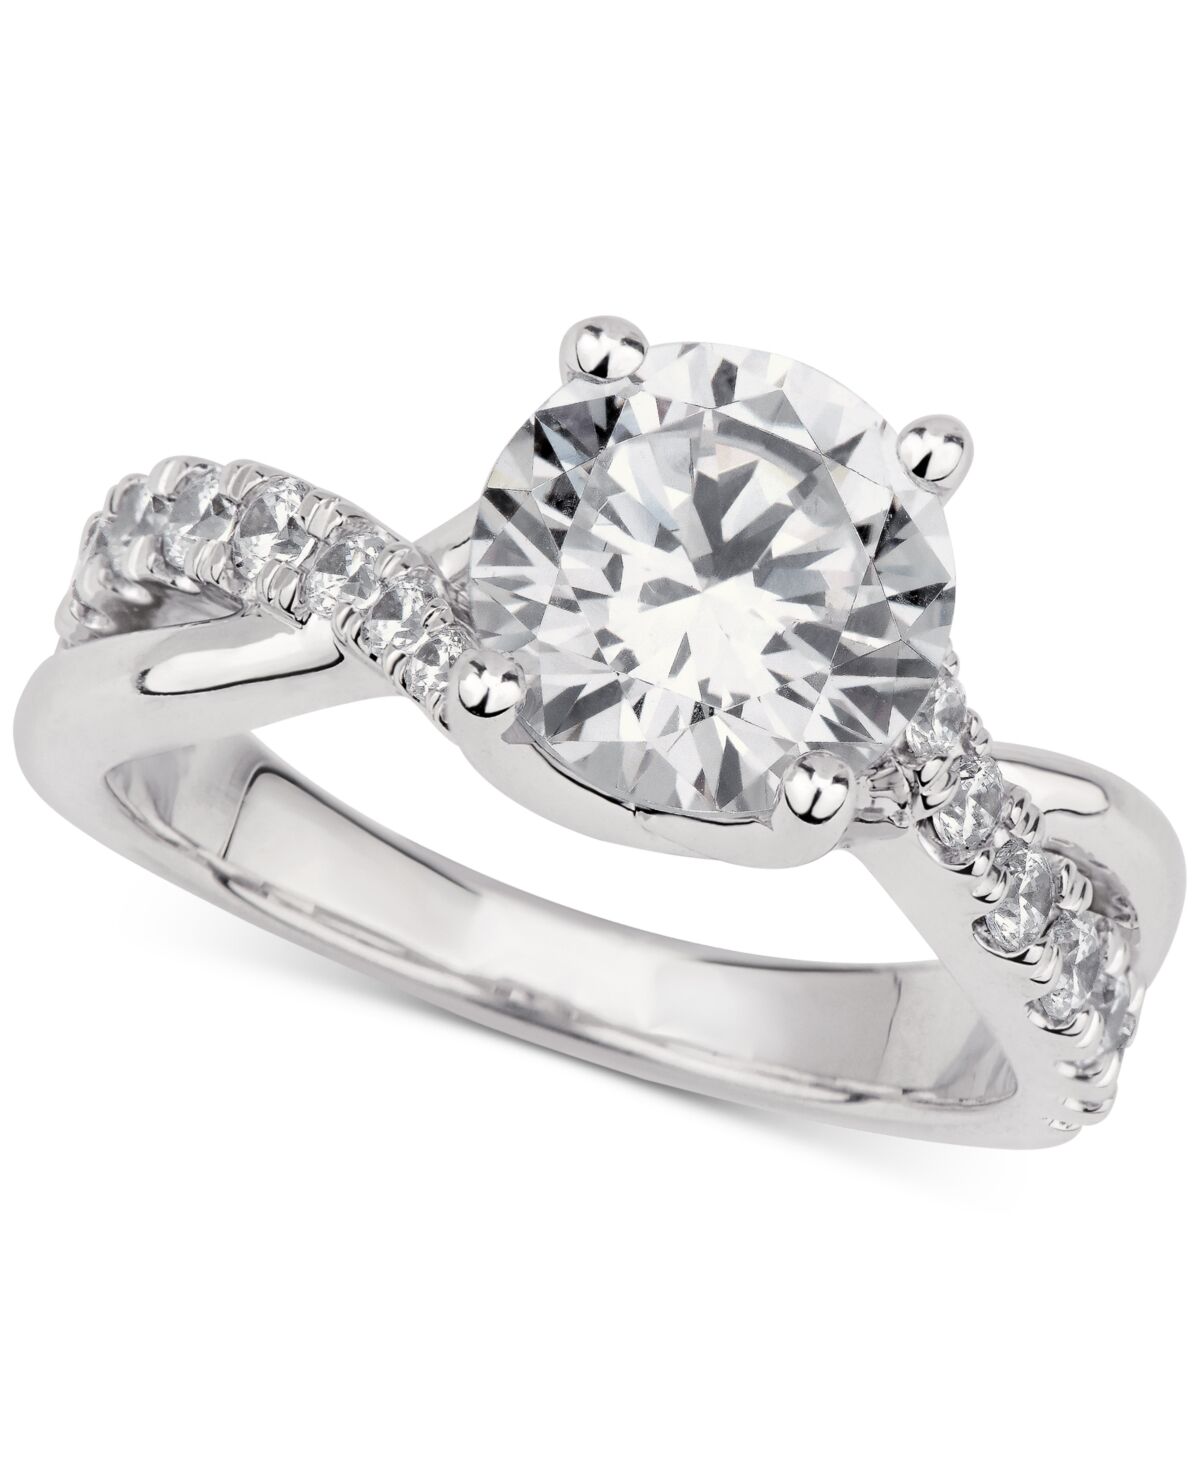 Gia Certified Diamonds Gia Certified Diamond Twist Shank Engagement Ring (2-1/2 ct. t.w.) in 14k White Gold - White Gold